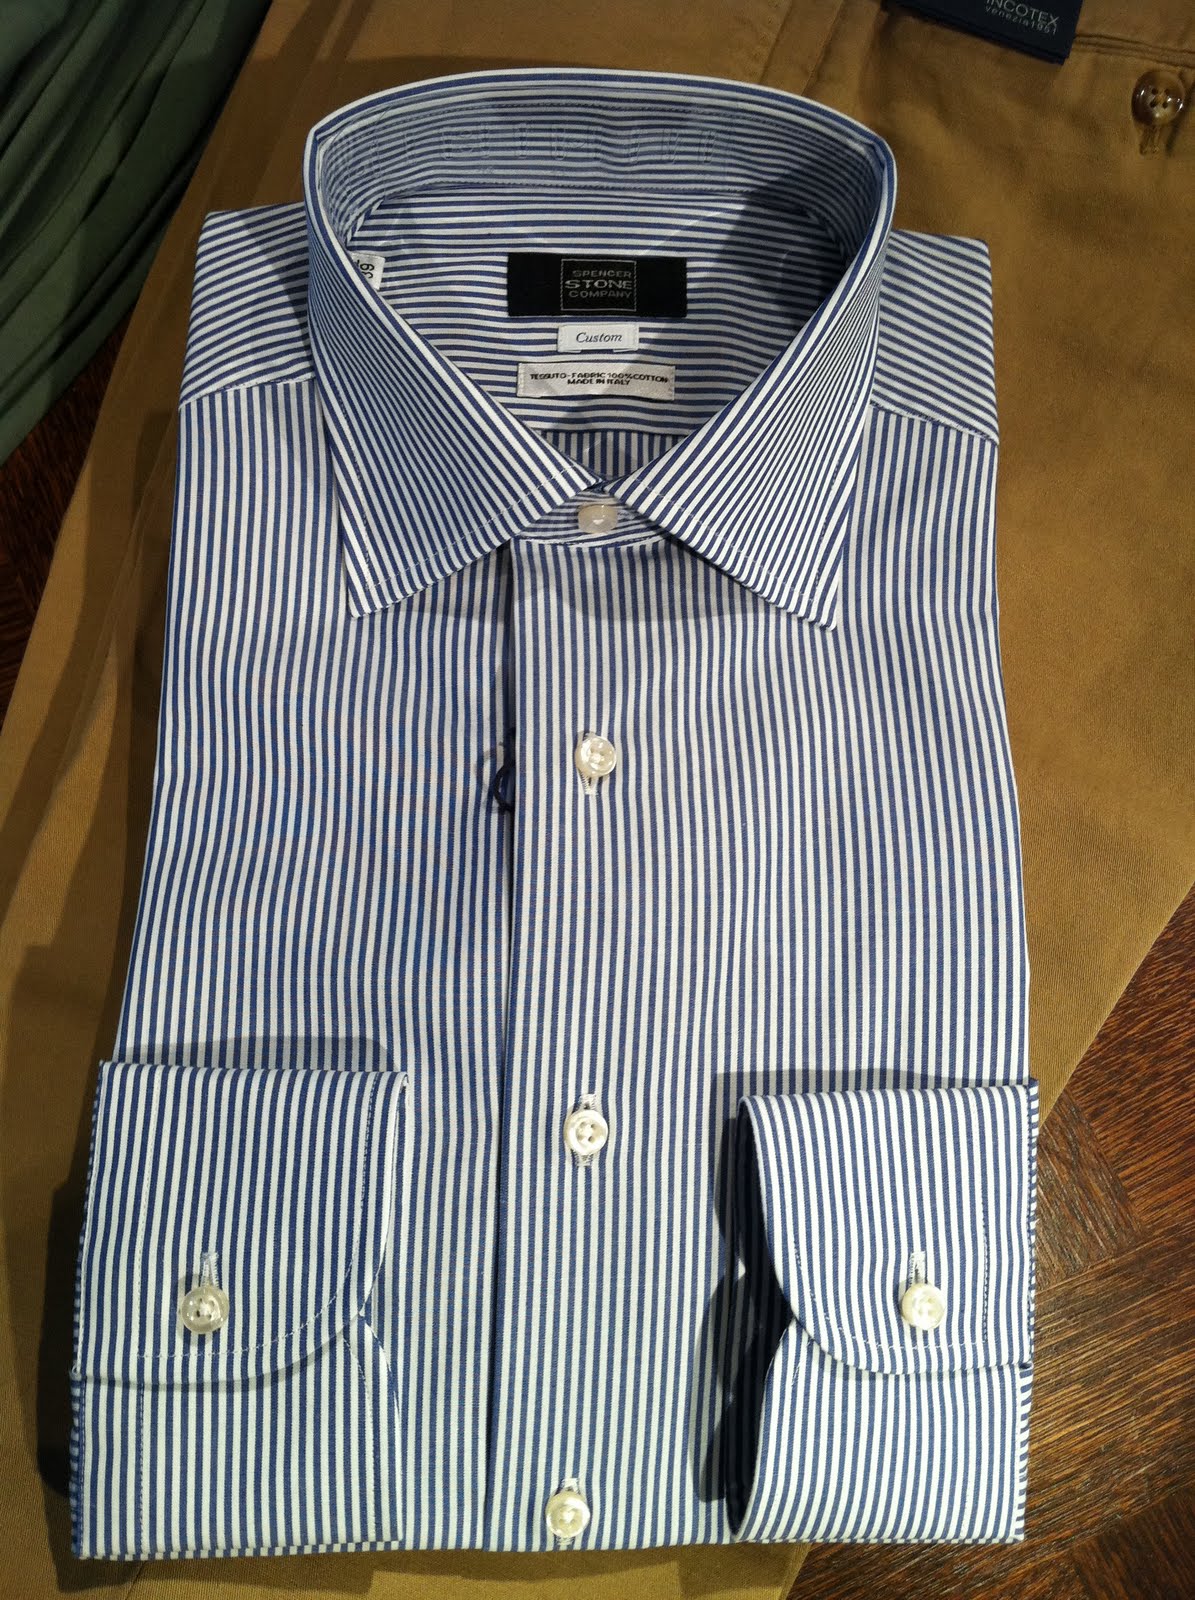 Spencer Stone Co.: SSC Private Label Shirts